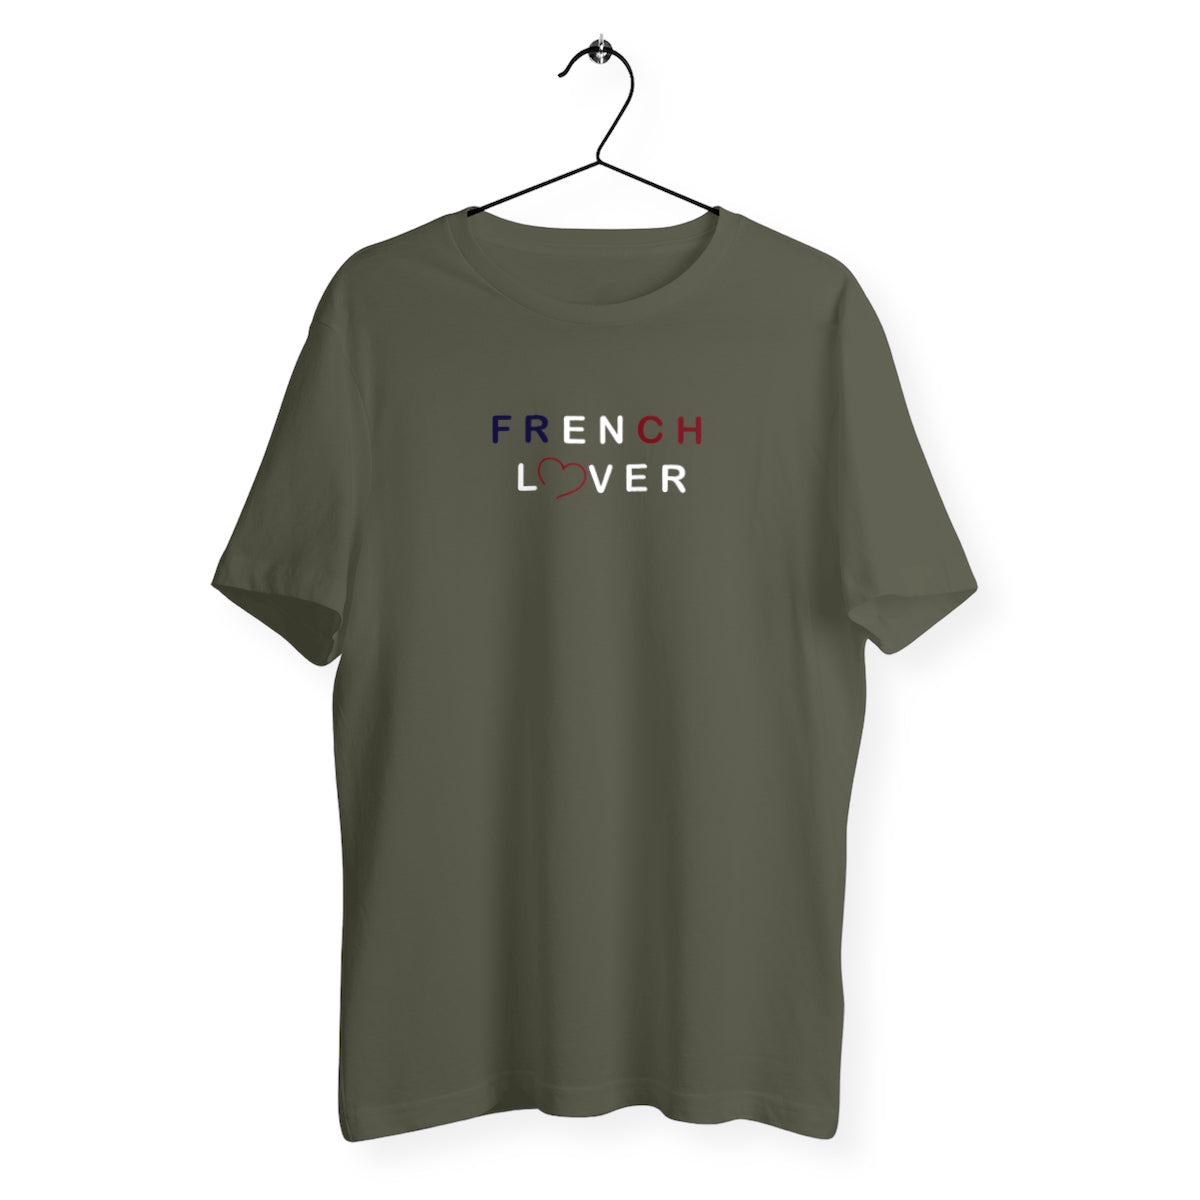 T-Shirt Homme Bio - French Lover, T-shirt french lover en coton bio de TFrench, t-shirt french lover, t-shirt homme saint valentin, tee shirt homme french lover, t-shirt saint valentin, t-shirt idée cadeau, tee shirt en coton bio, t-shirt french lover vert